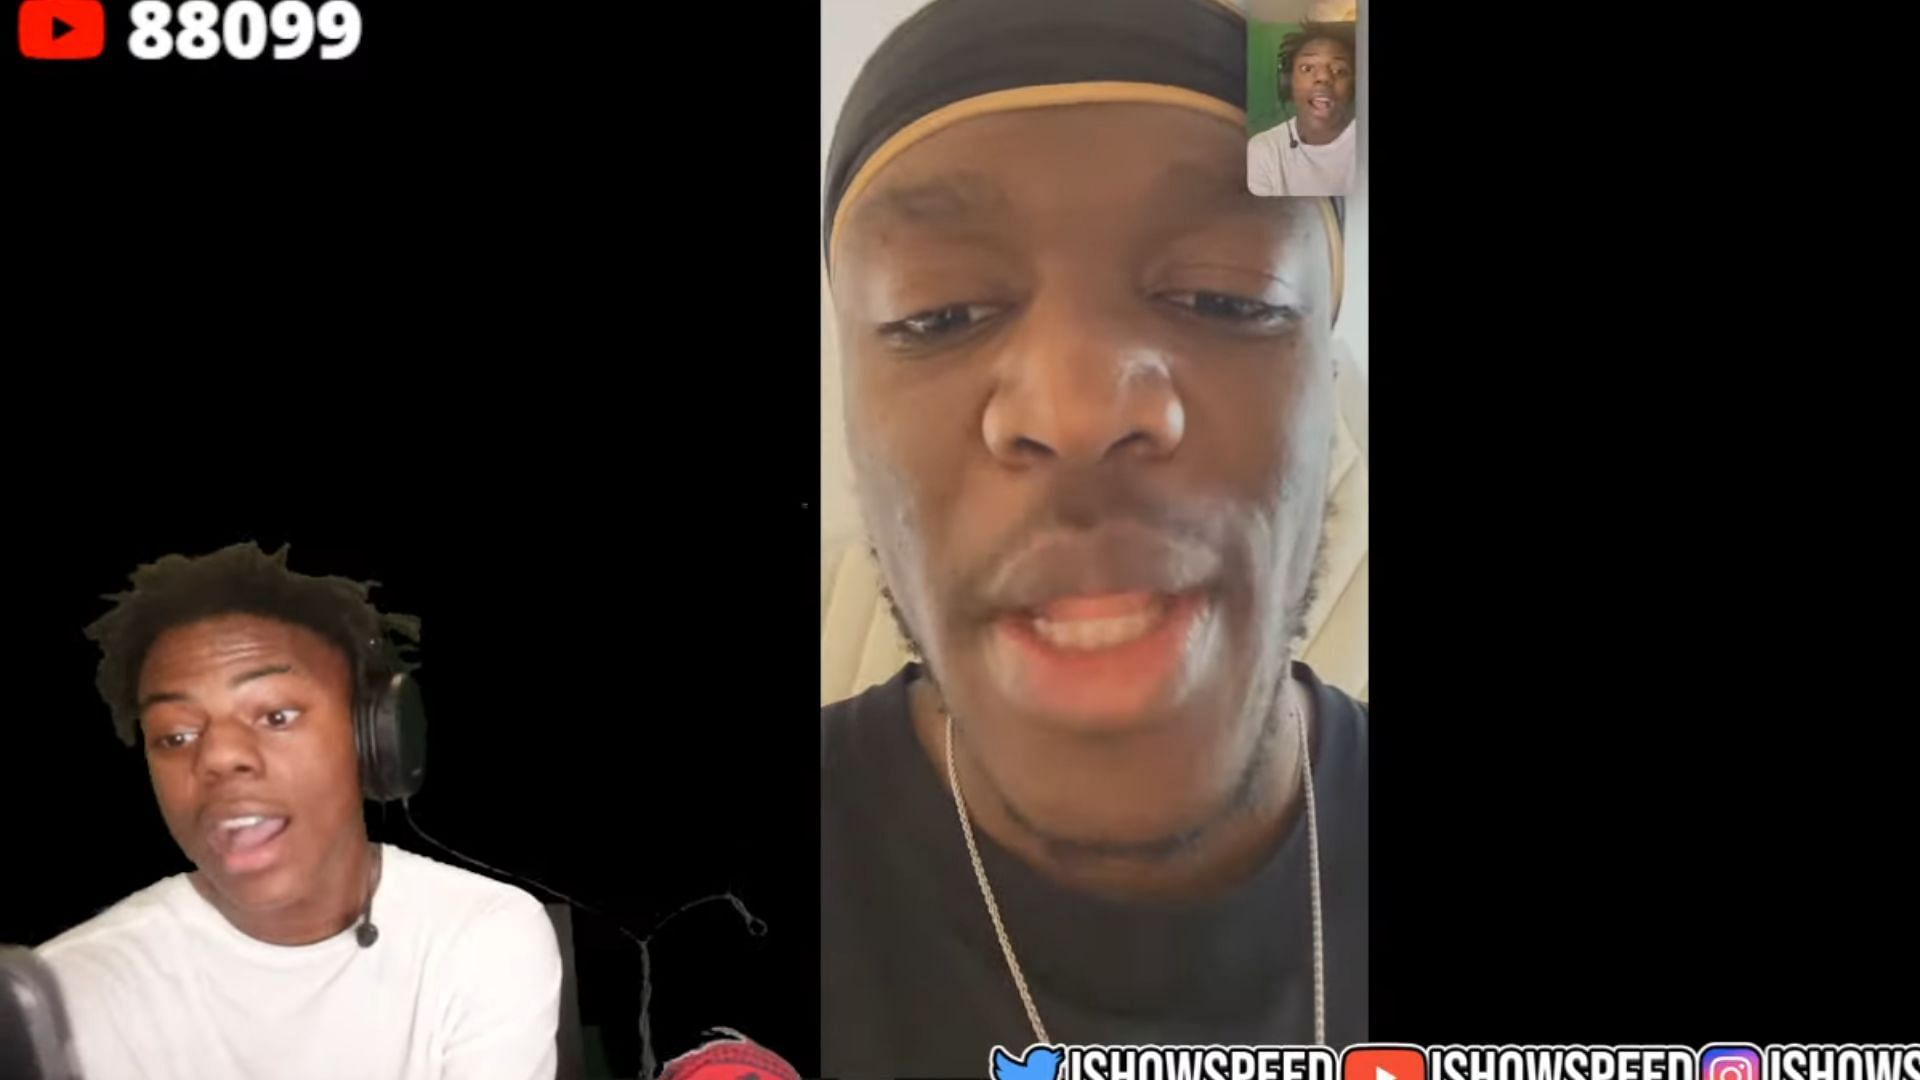 KSI and IShowSpeed wager ahead of World Cup 2022 (Image via YouTube)